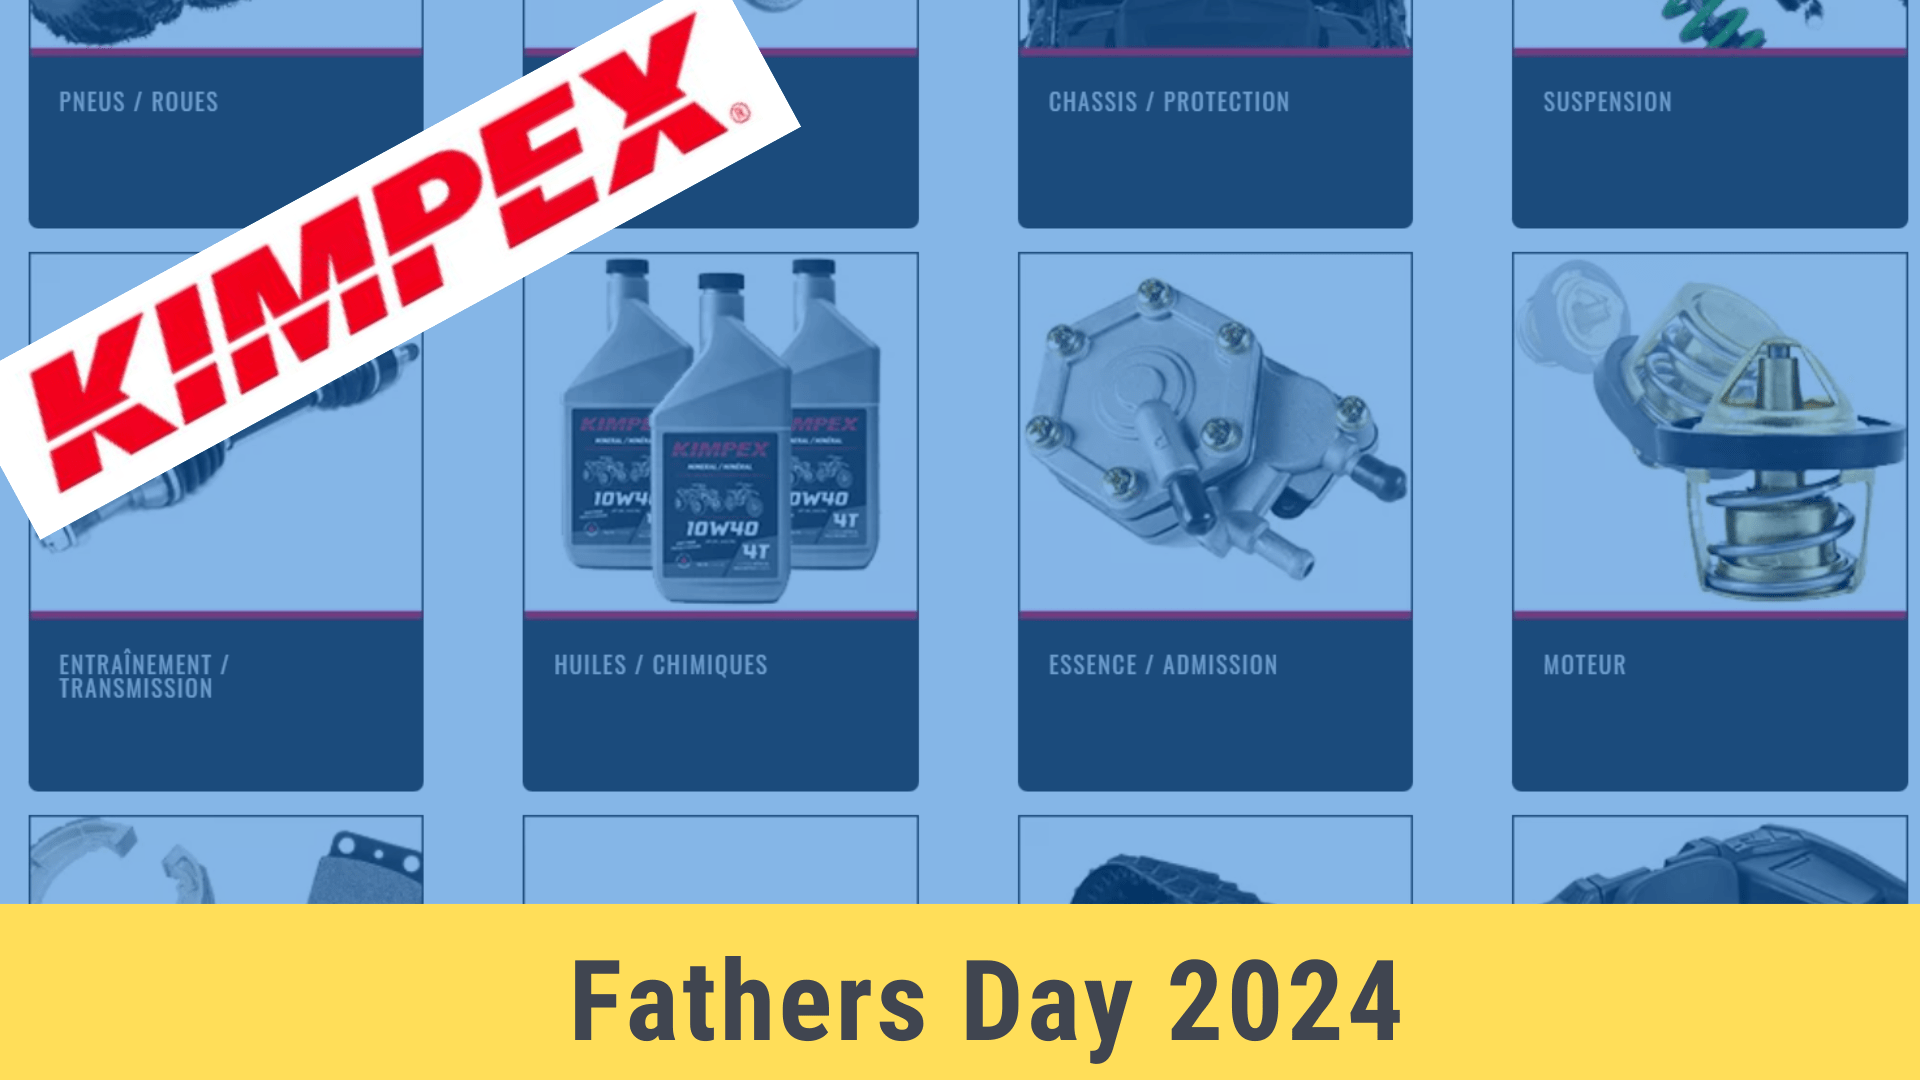 kimpex father's day gift ideas